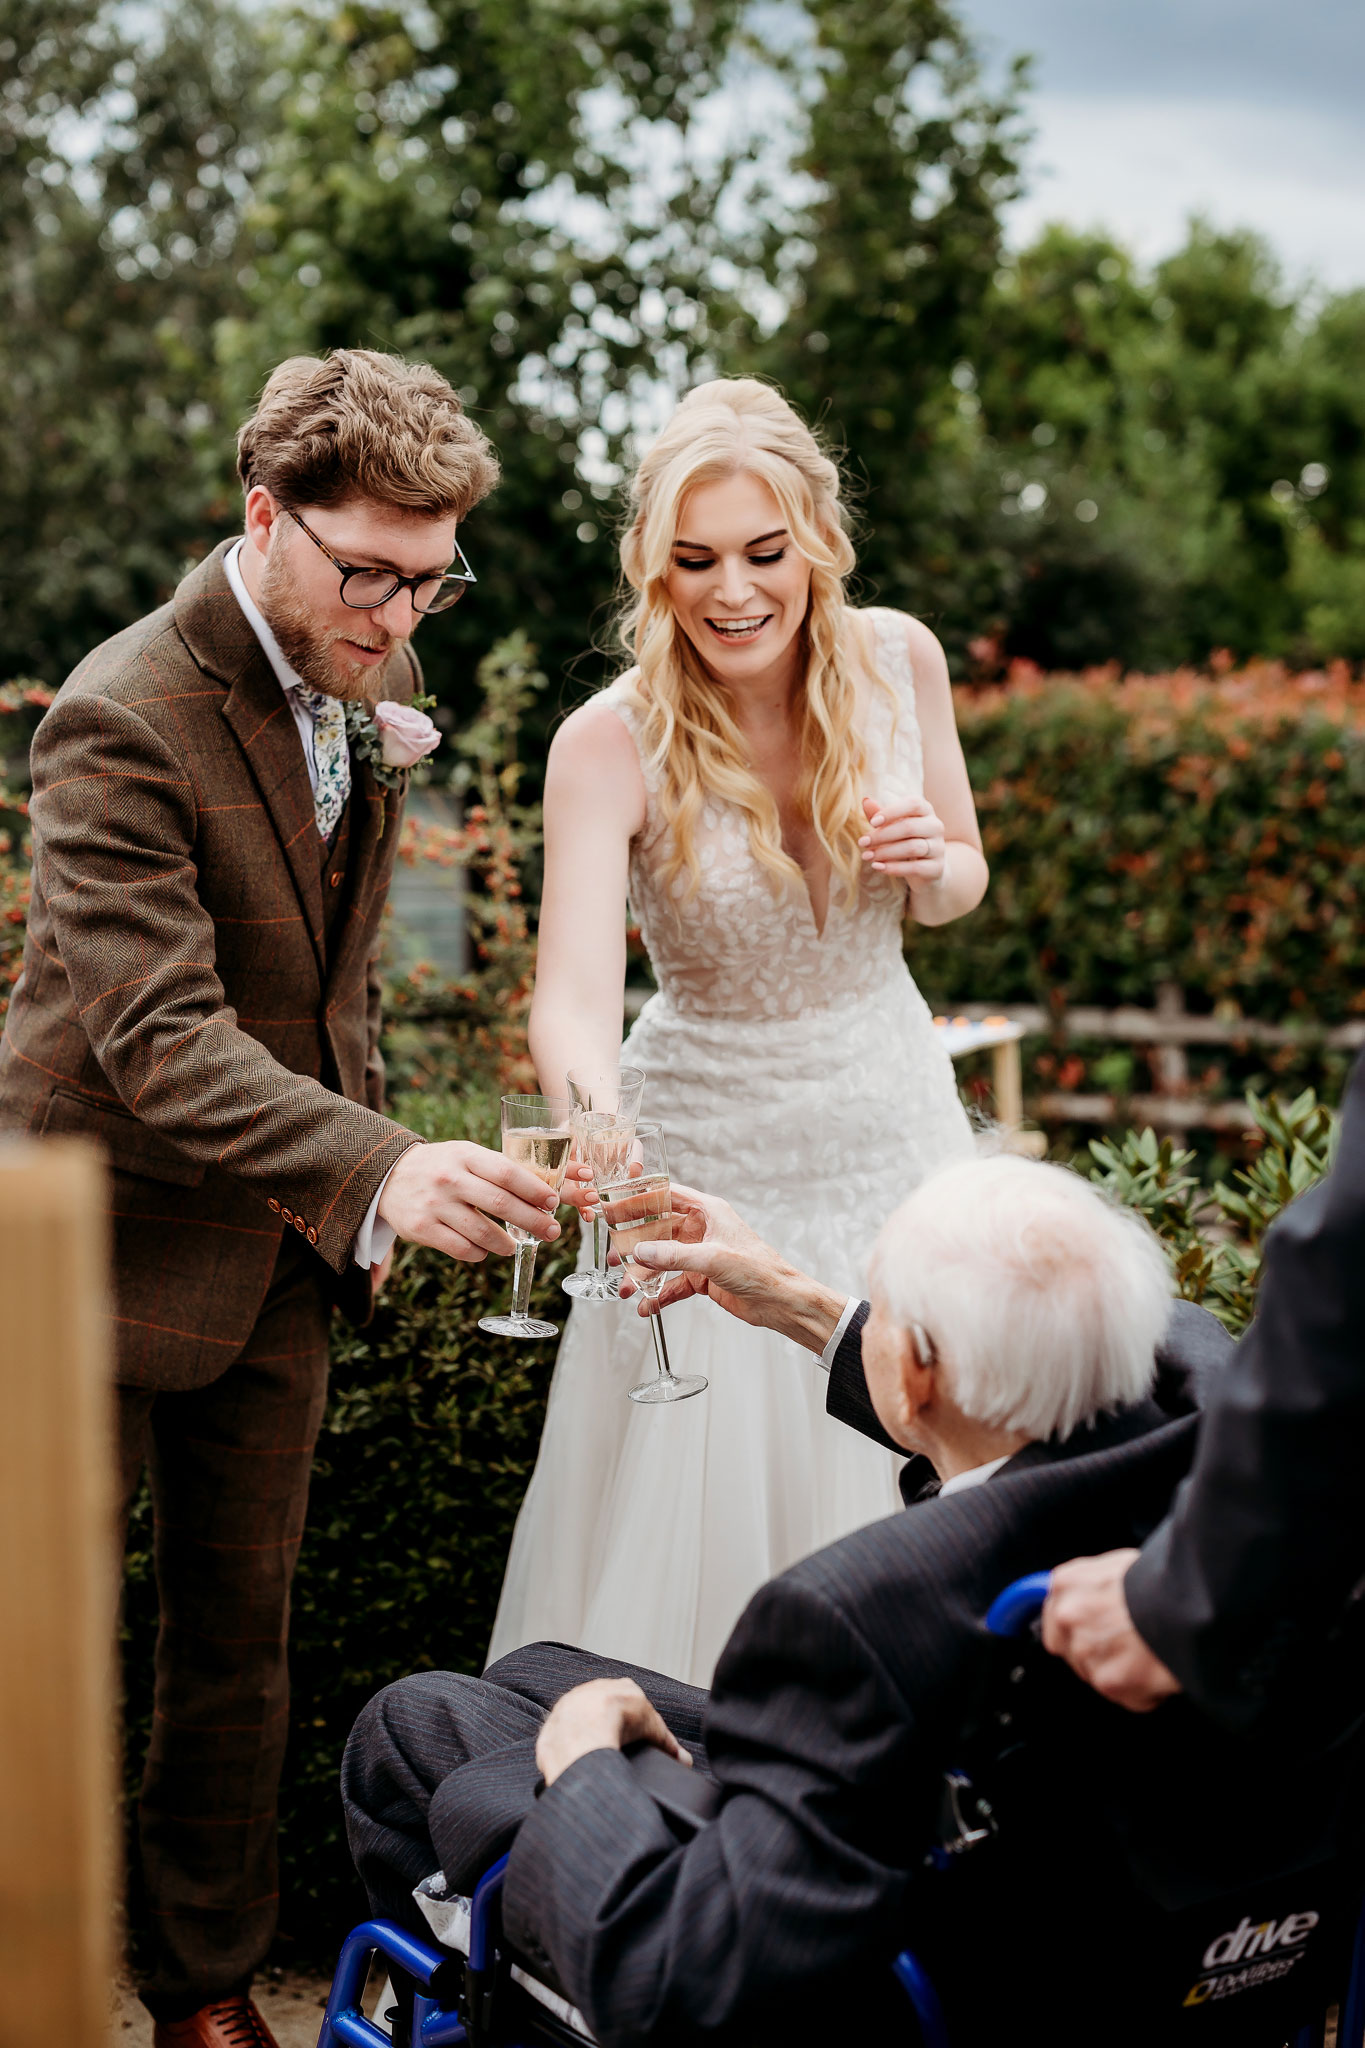 the bride and groom cheering with their granddad